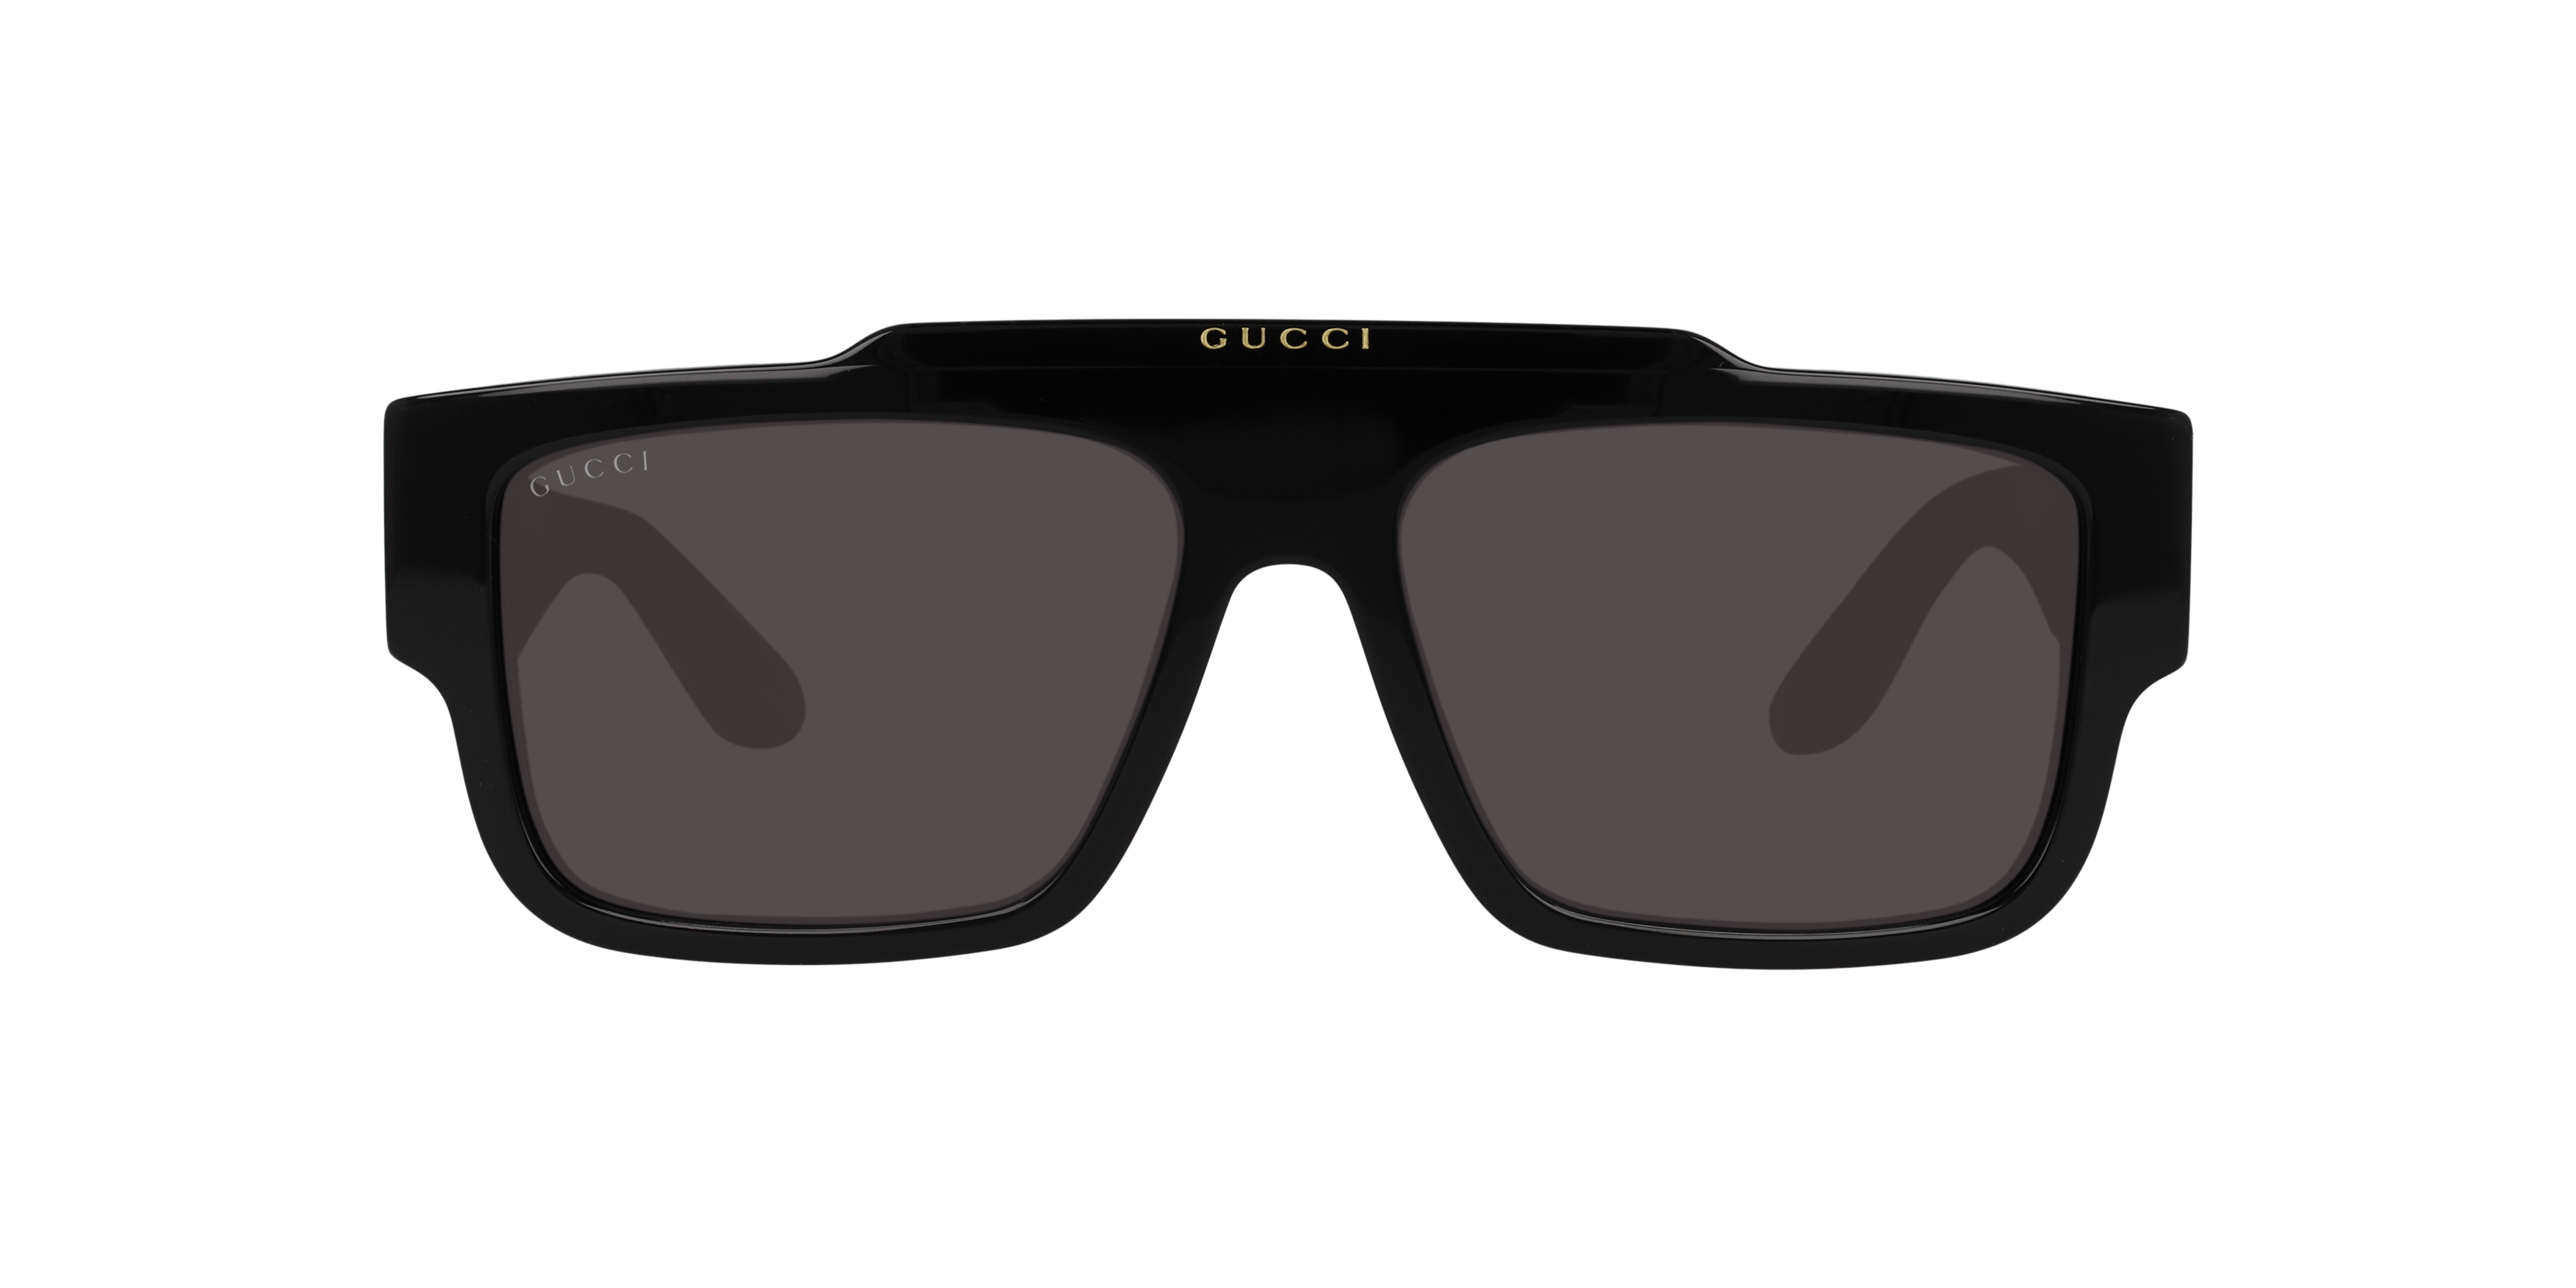 [products.image.front] Gucci GG1460S 001 Solbriller